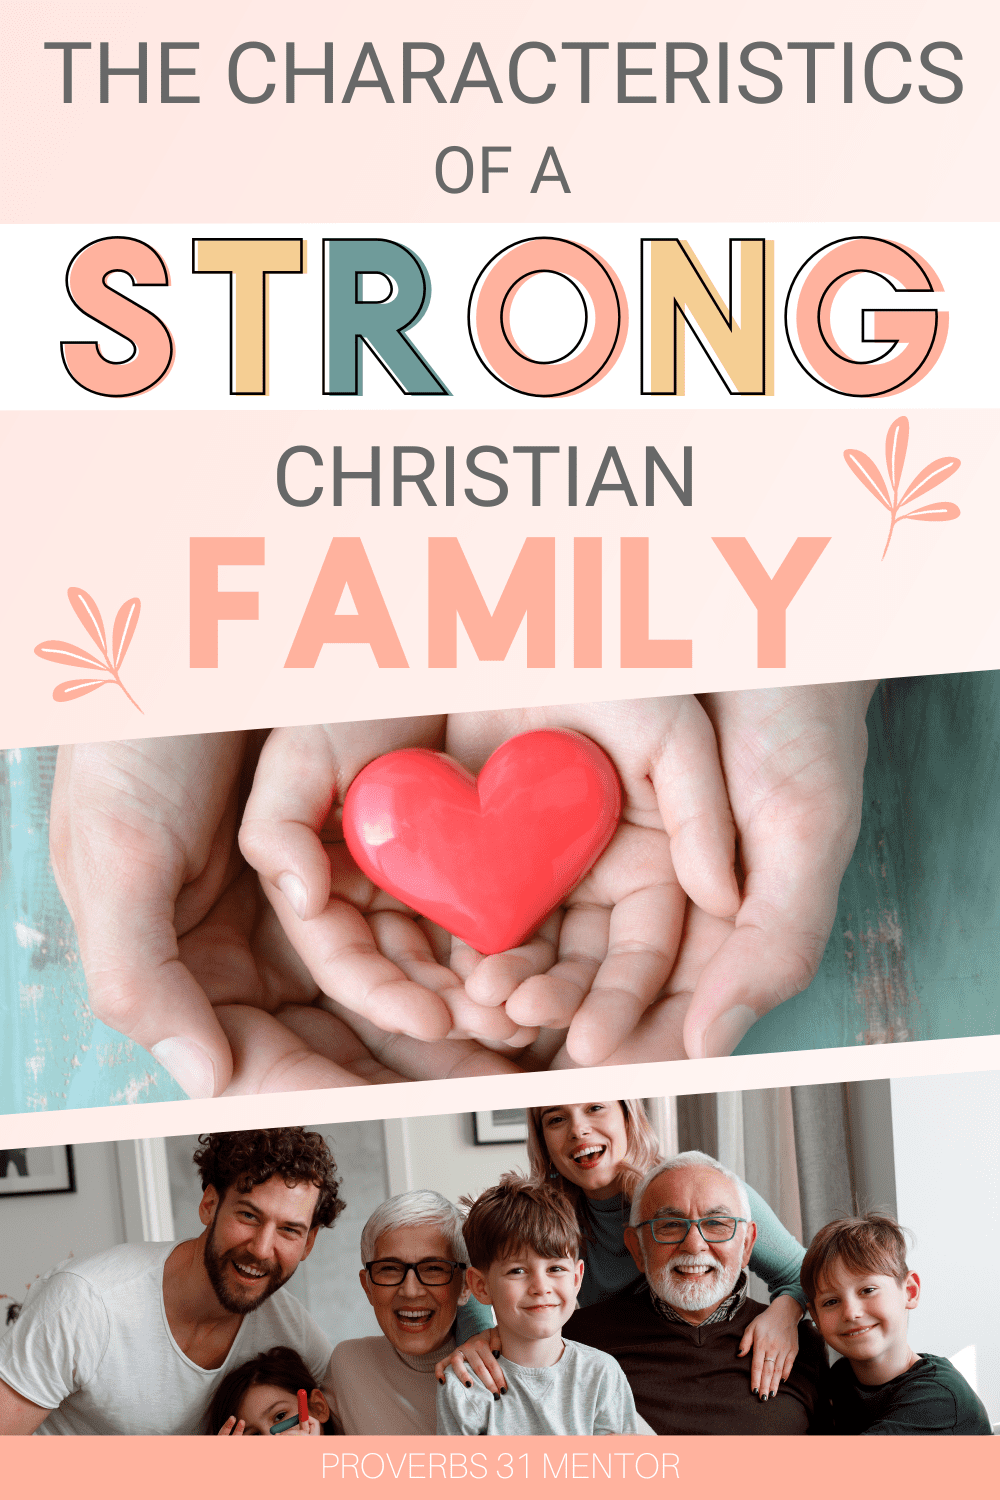 Title- How to Have a Strong Family Bond Picture- family together and heart in two hands